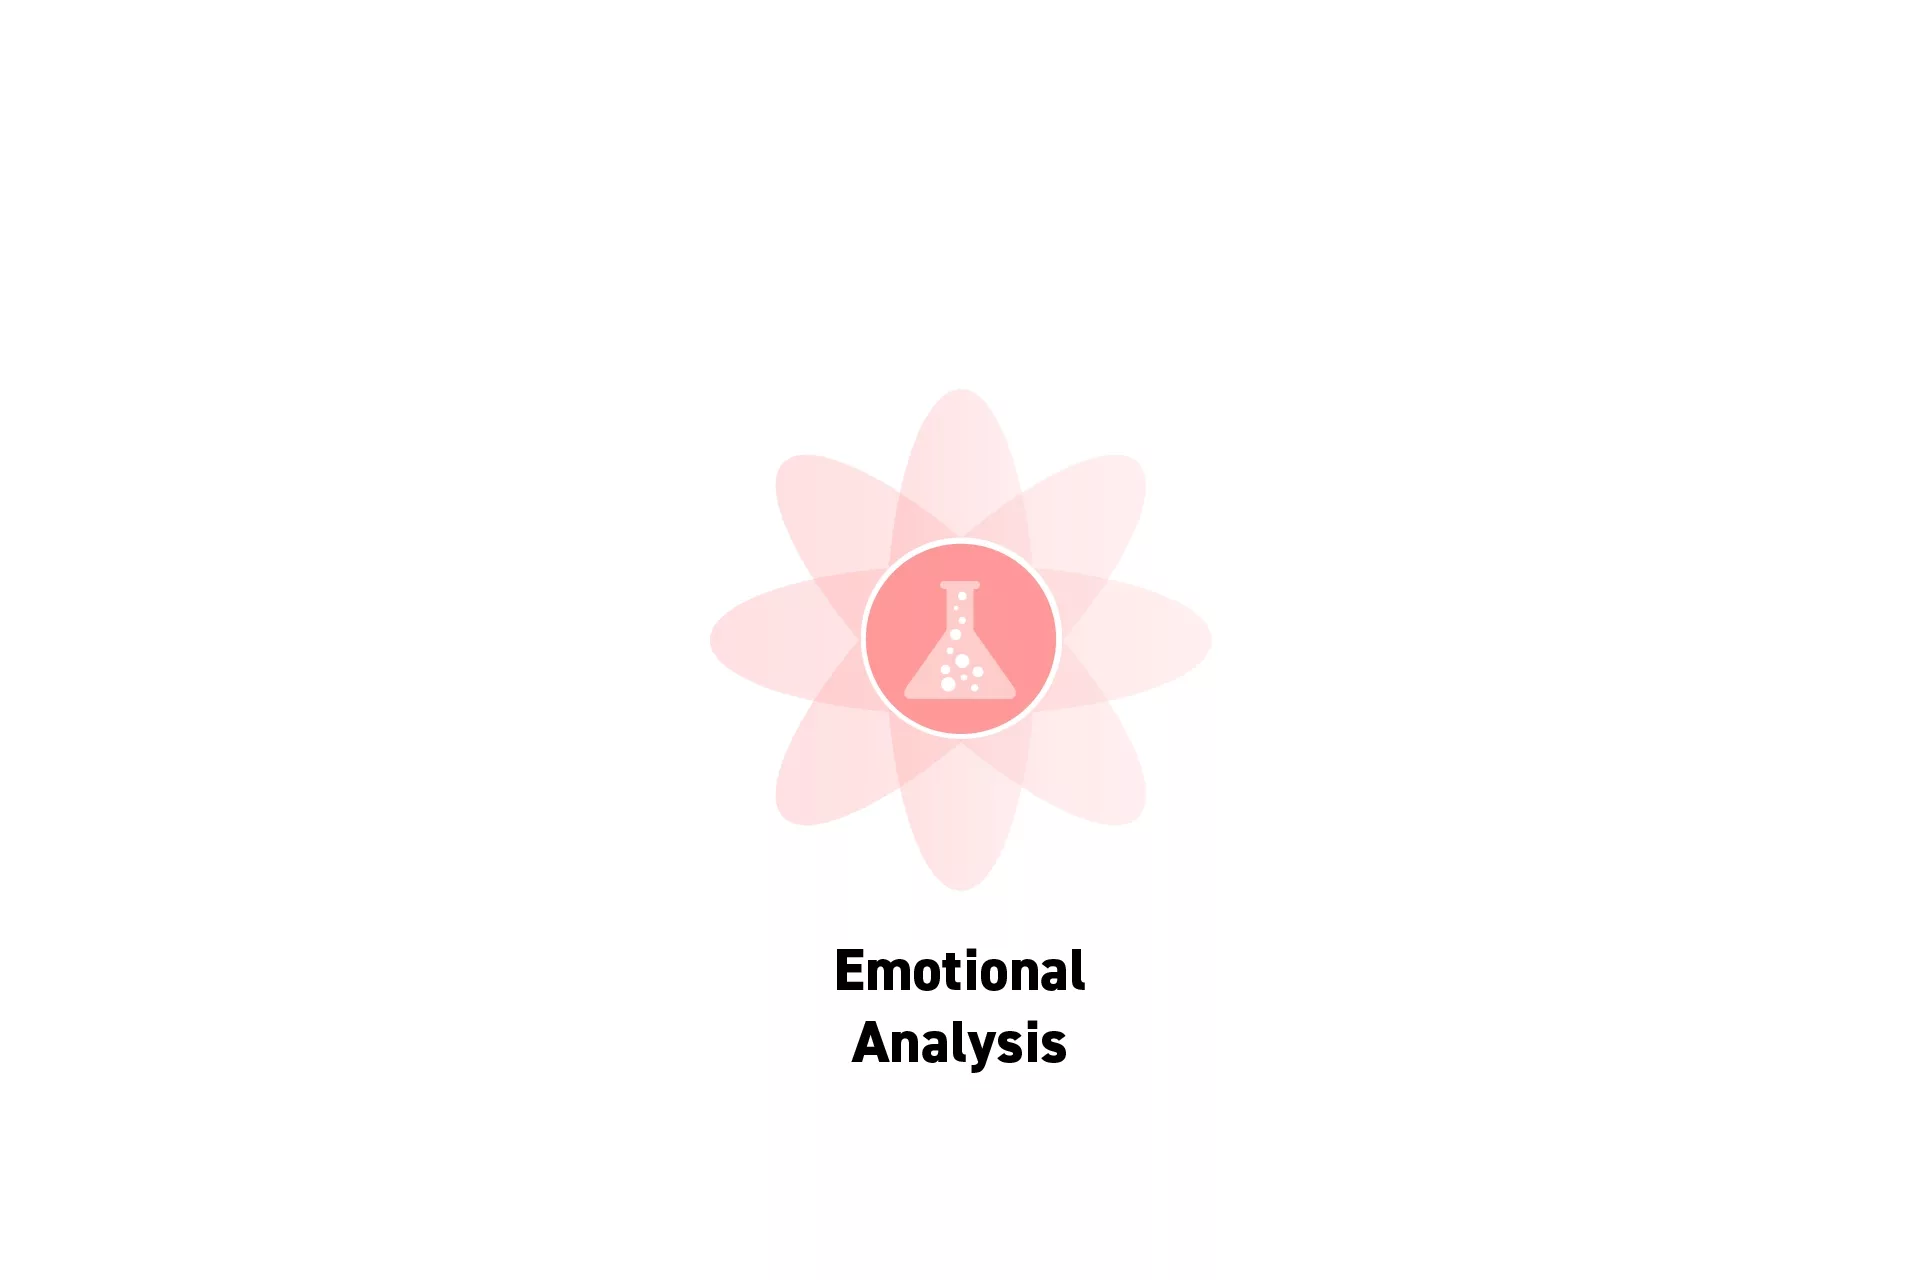 A flower that represents Strategy with the text “Emotional Analysis” beneath it.